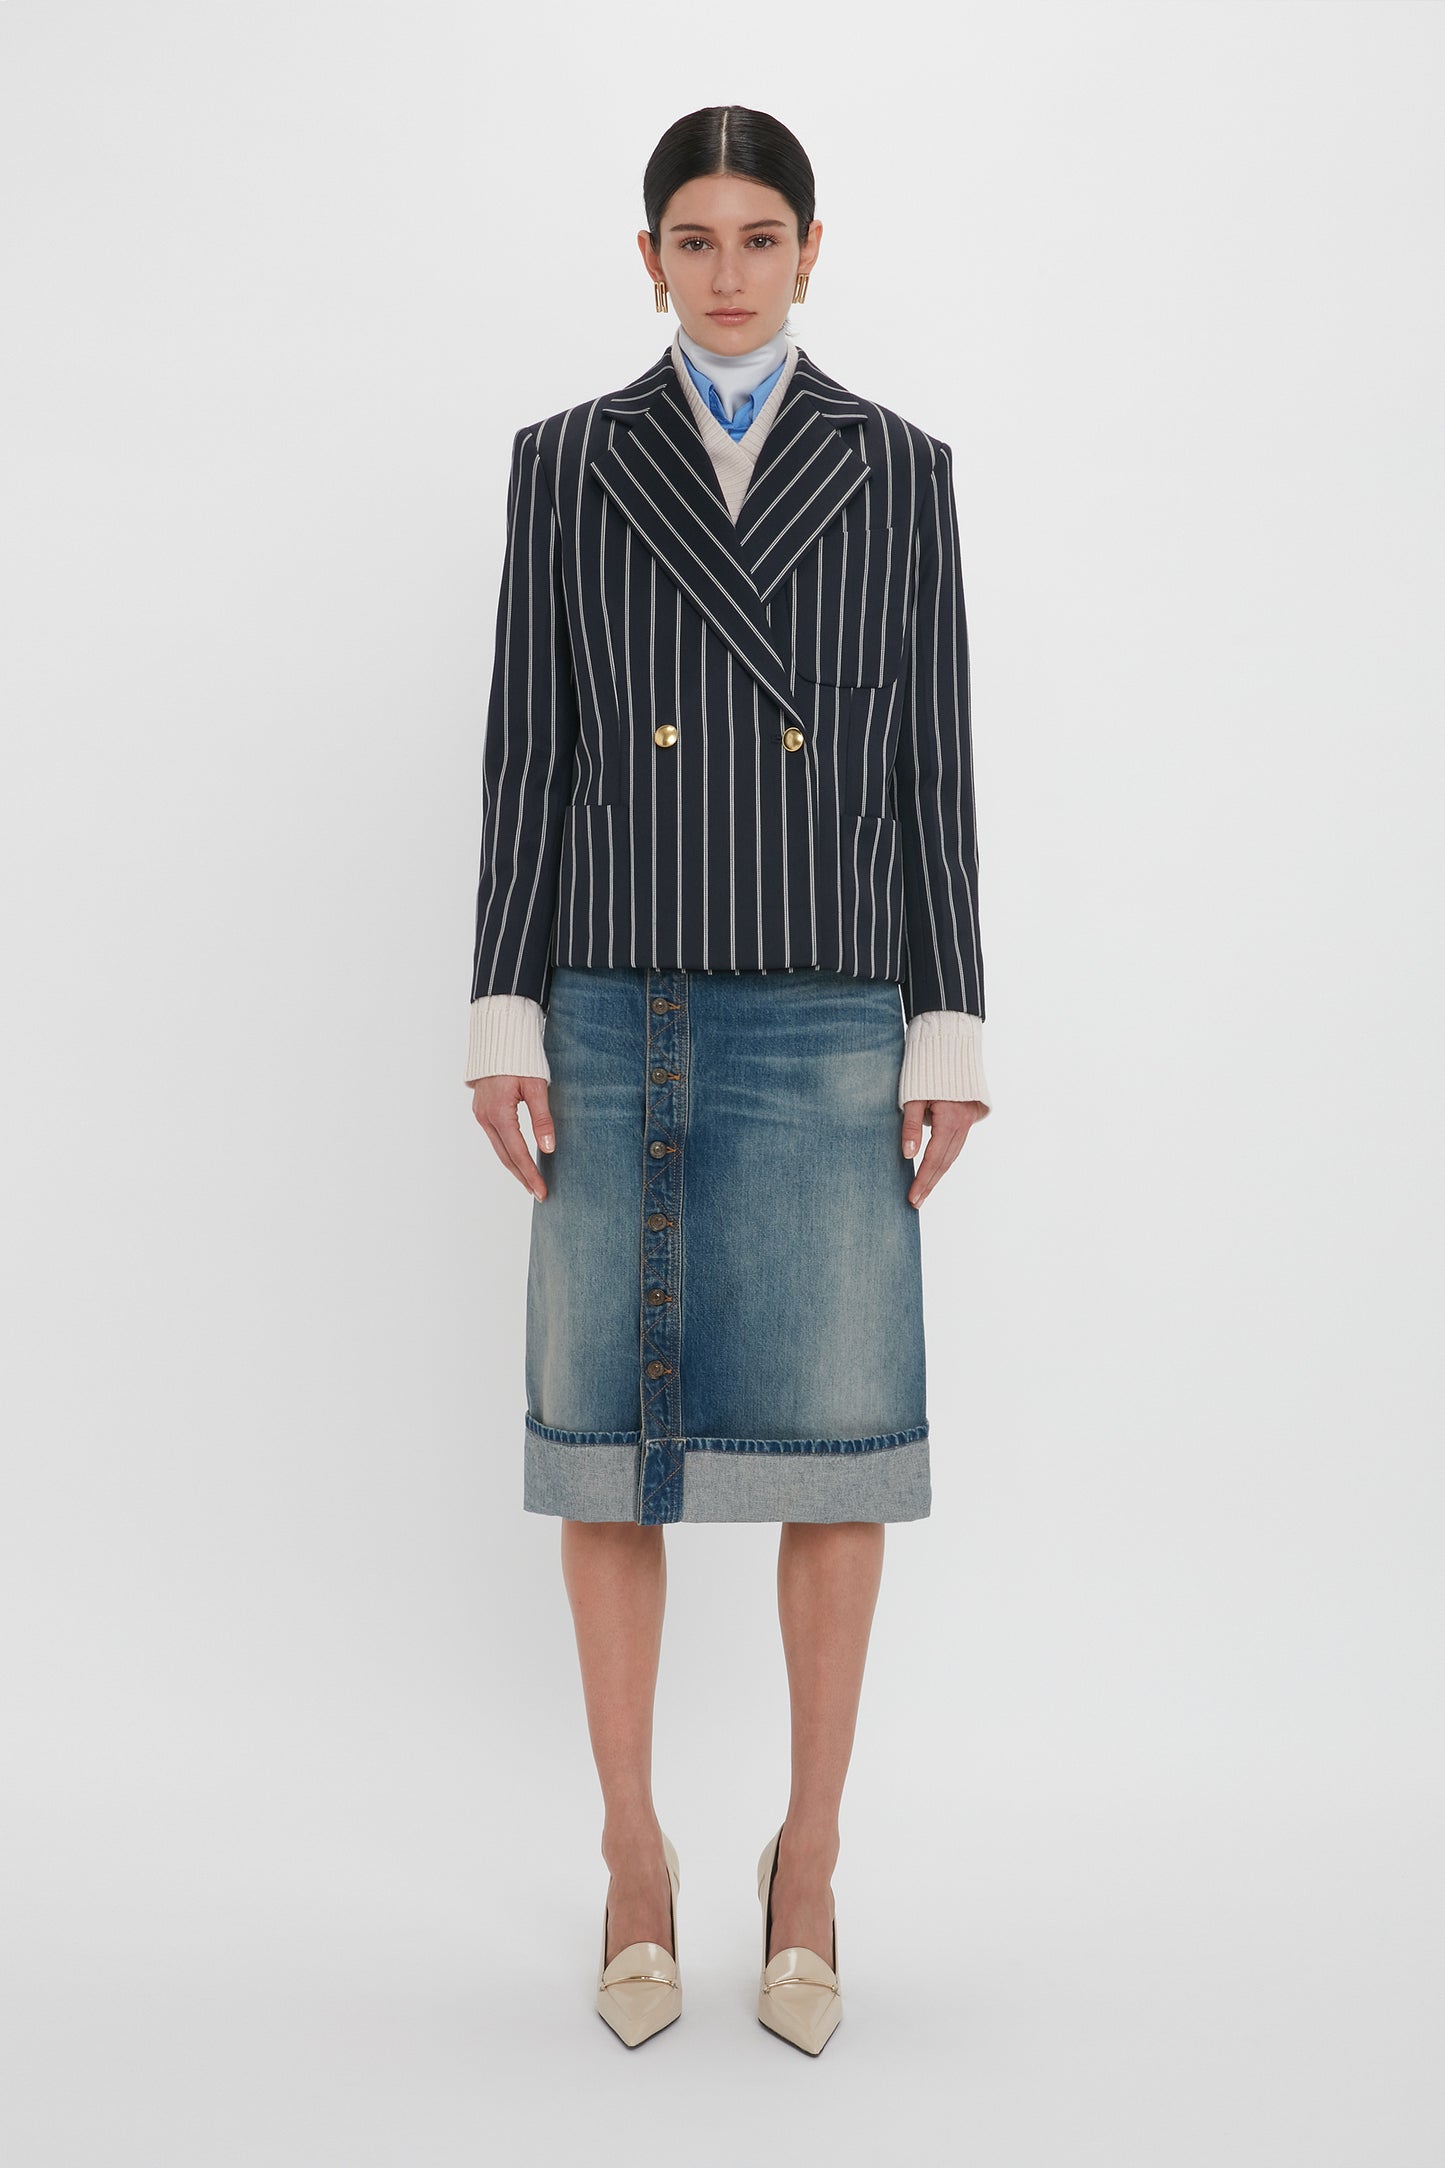 A person wearing a navy pinstripe double-breasted blazer, a light blue collared shirt with a scarf, a Victoria Beckham Placket Detail Denim Skirt In Heavy Vintage Indigo Wash, and beige pointed-toe heels stands against a plain white background.